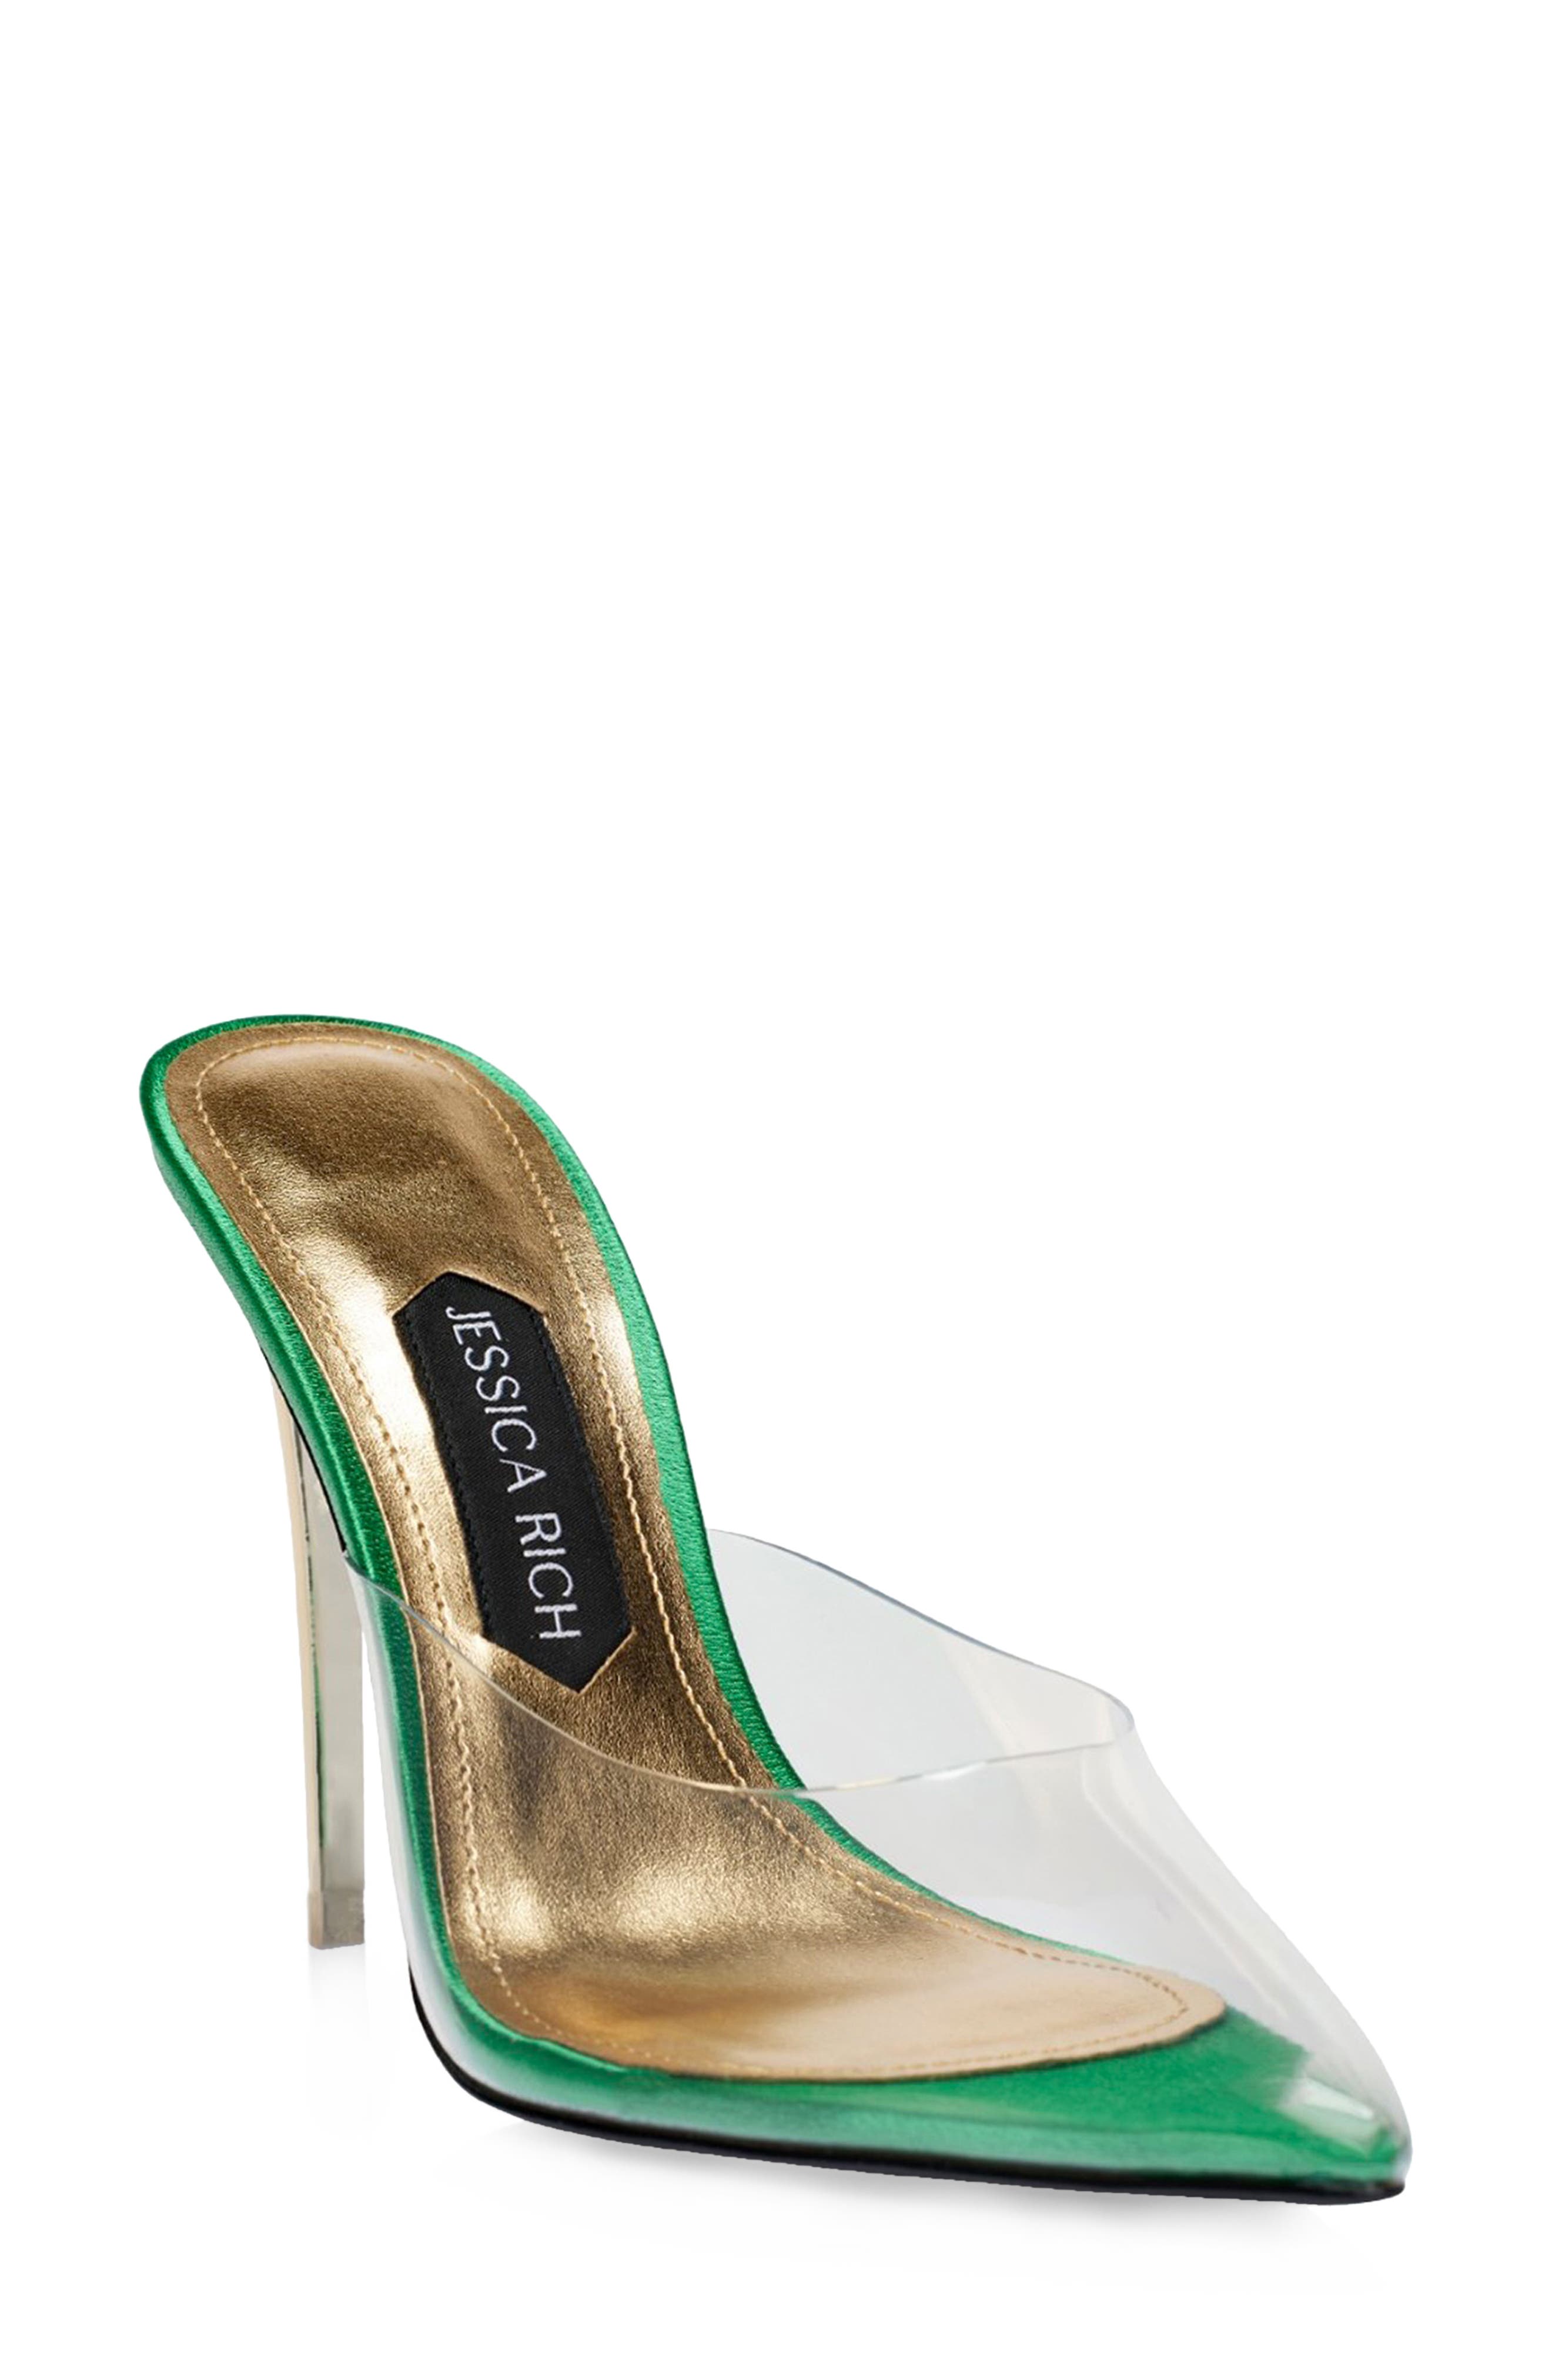 JESSICA RICH So Bossy Pointed Toe Pump in Green at Nordstrom